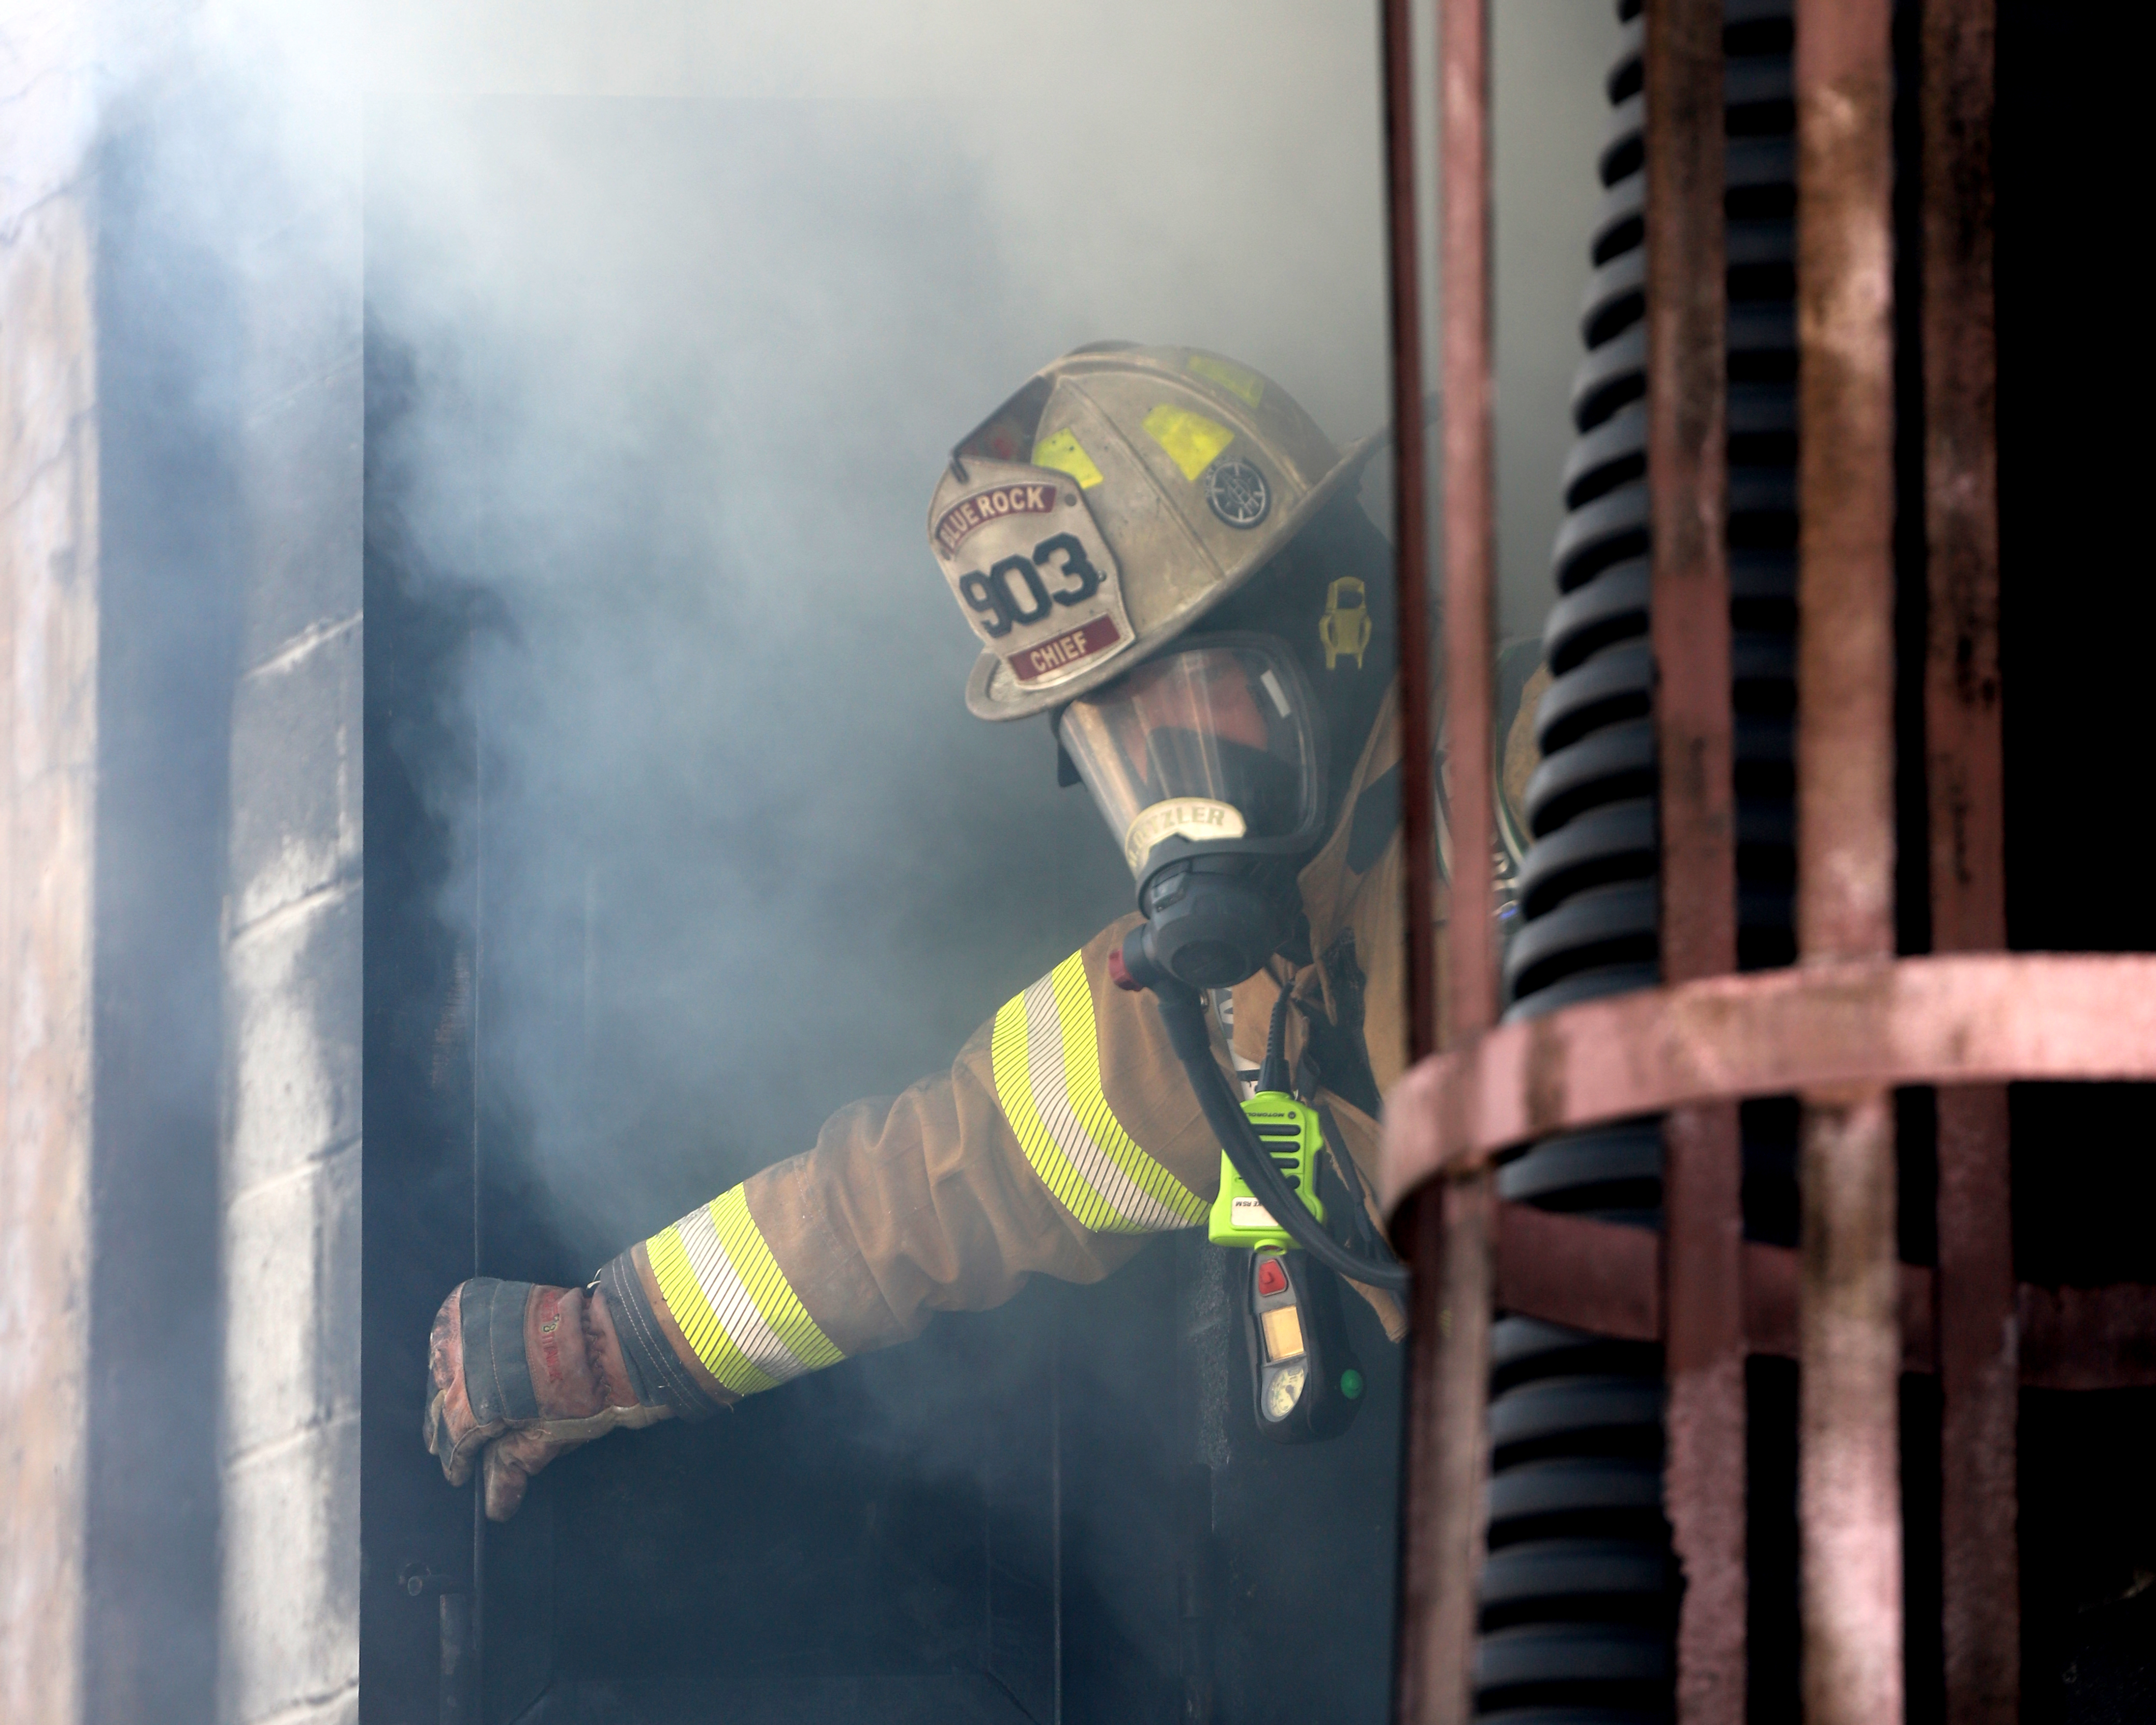 Firefighter standing in front of smoke